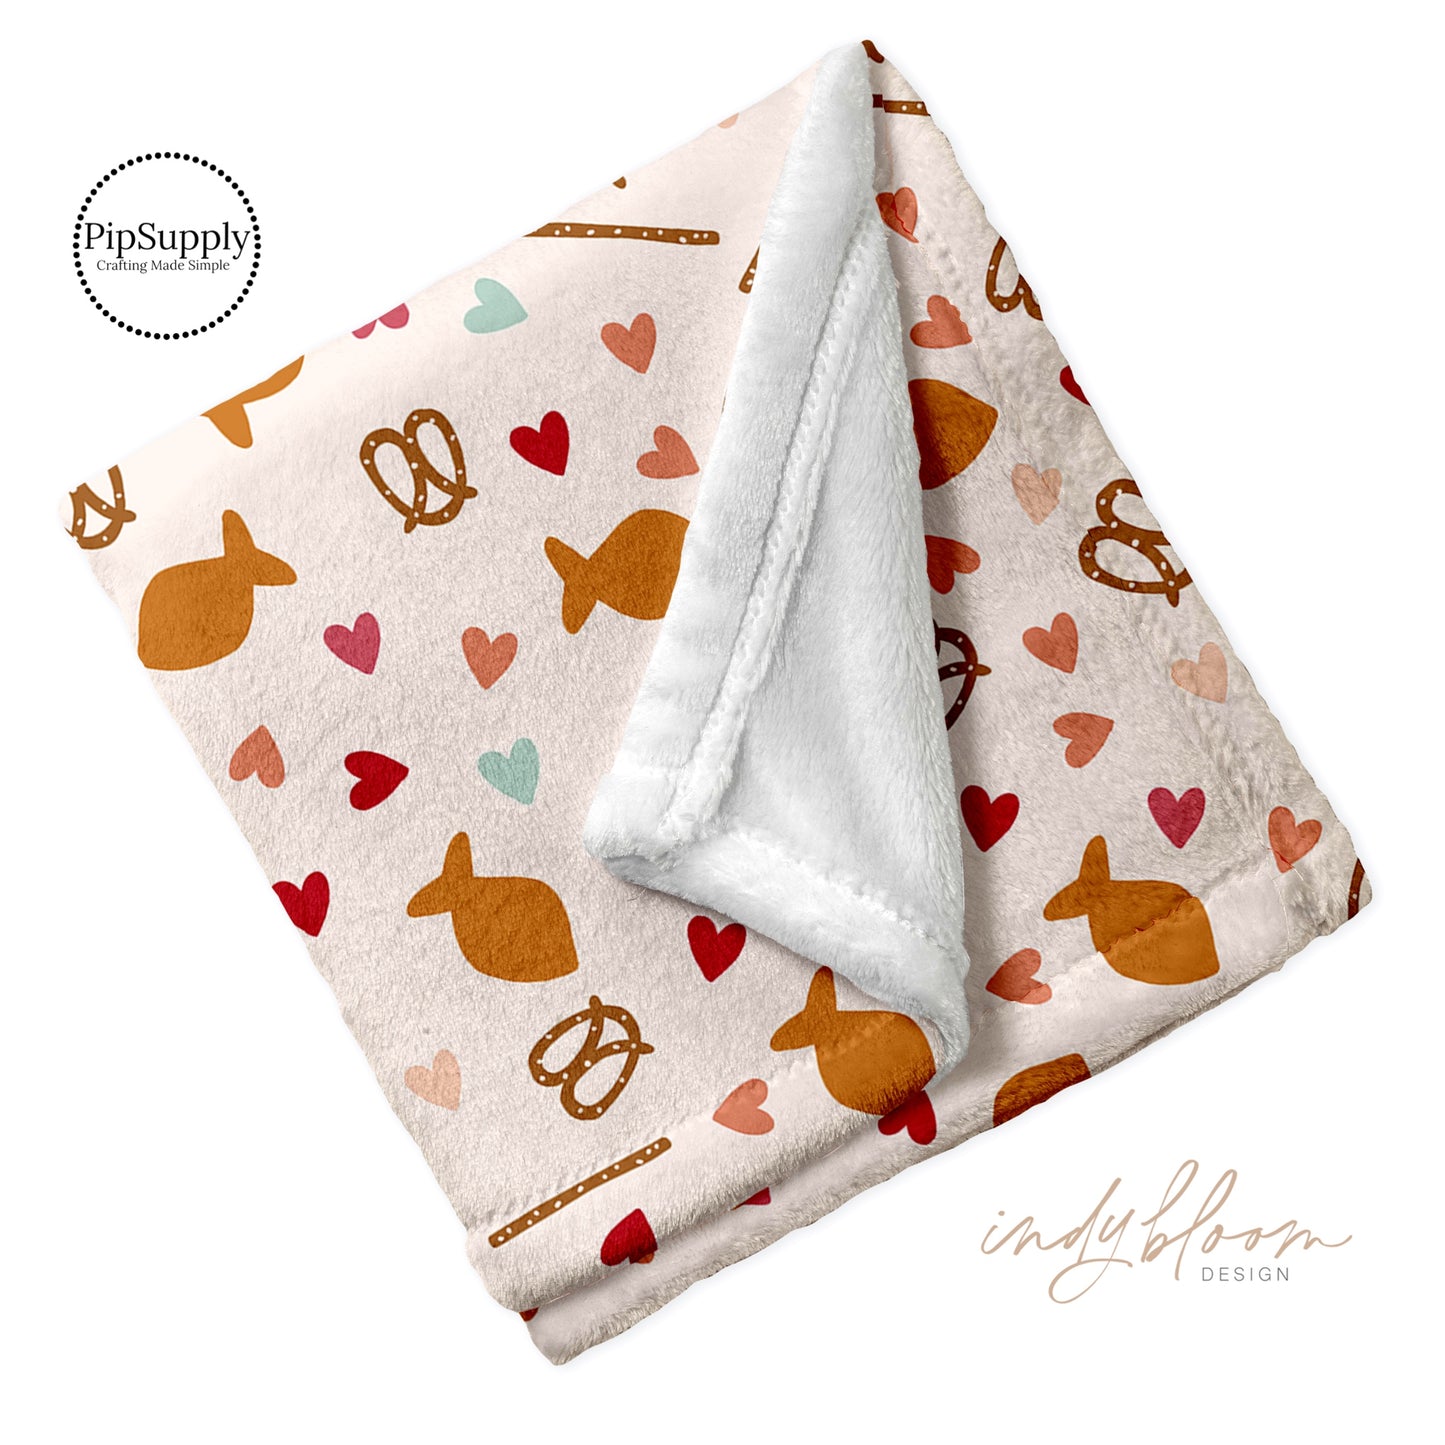 Snacks and hearts pattern on minky furr folded blanket. Gold Fish Custom Printed Blanket with Pretzels and Hearts.